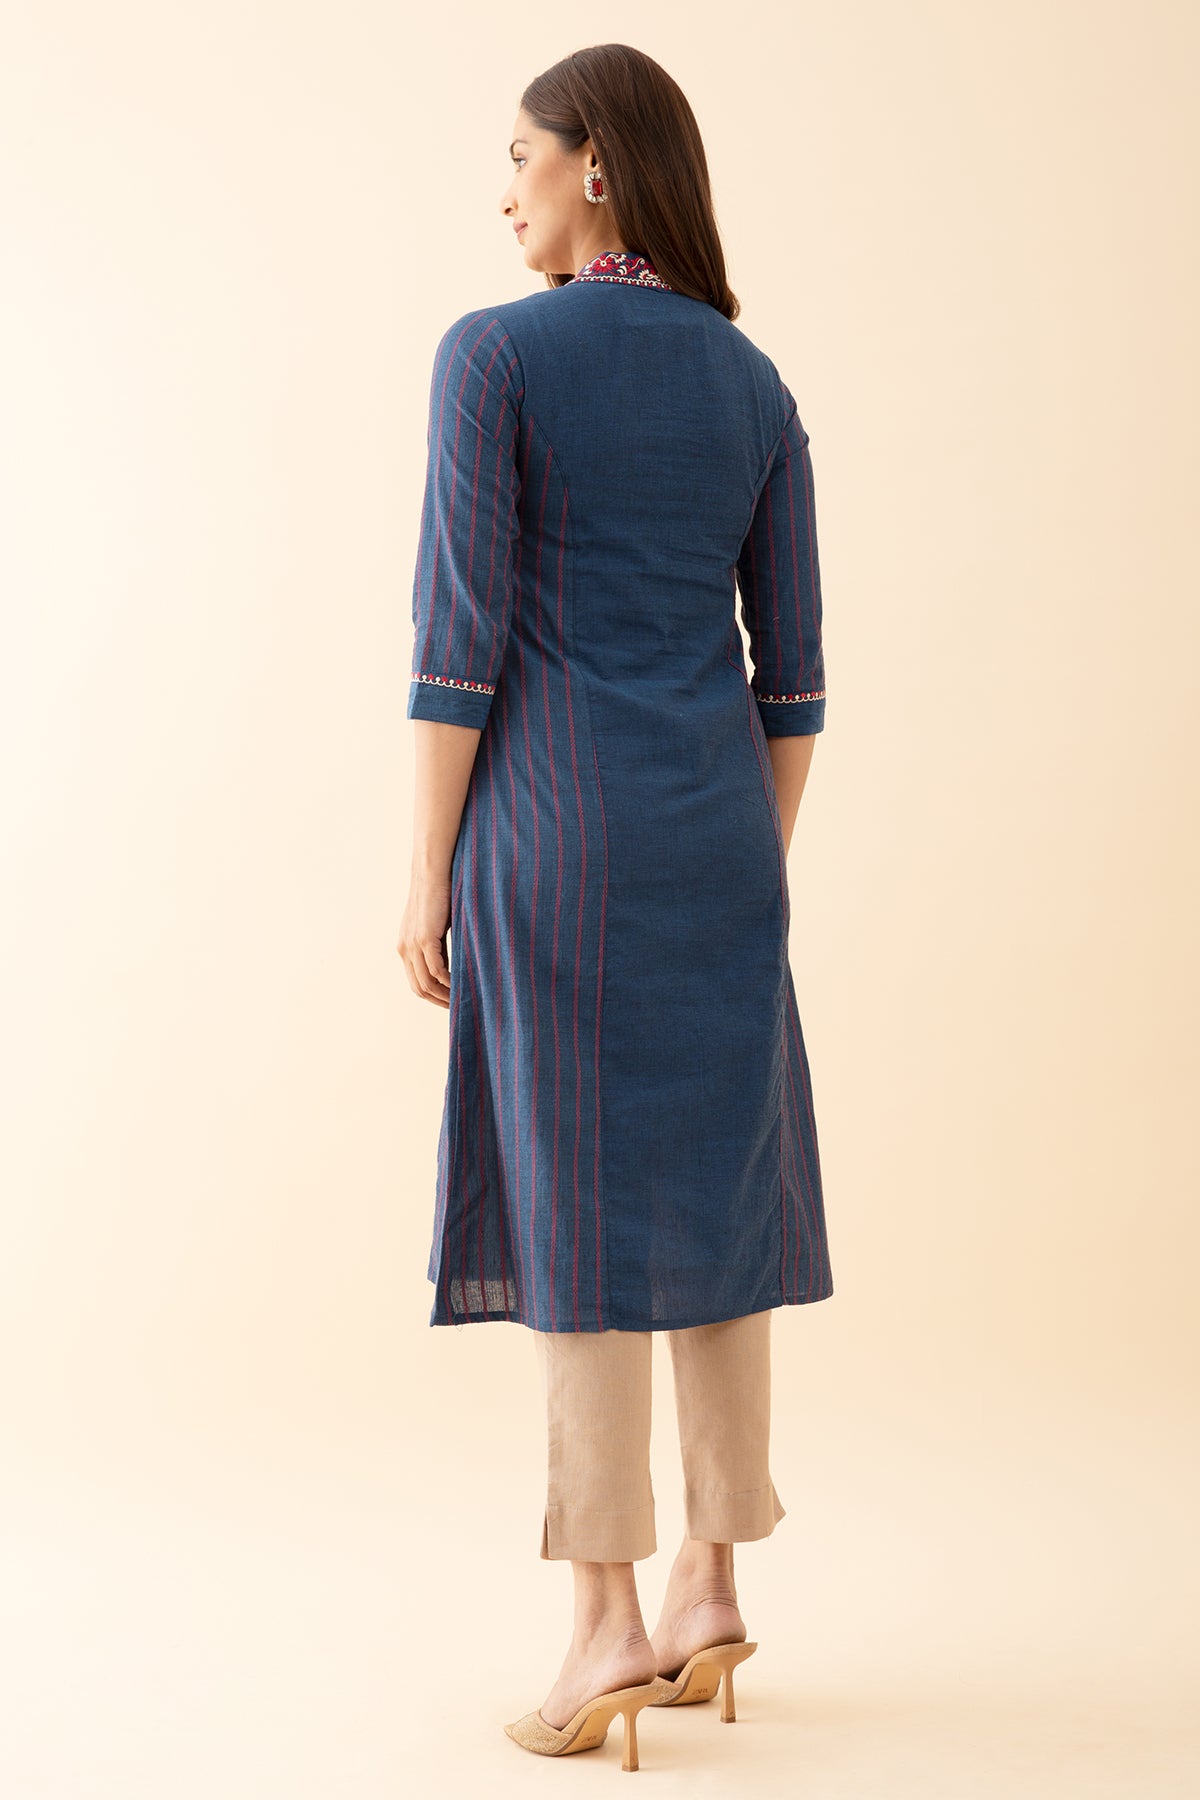 Panelled A-Line Kurta with Embroidered Neckline - Blue